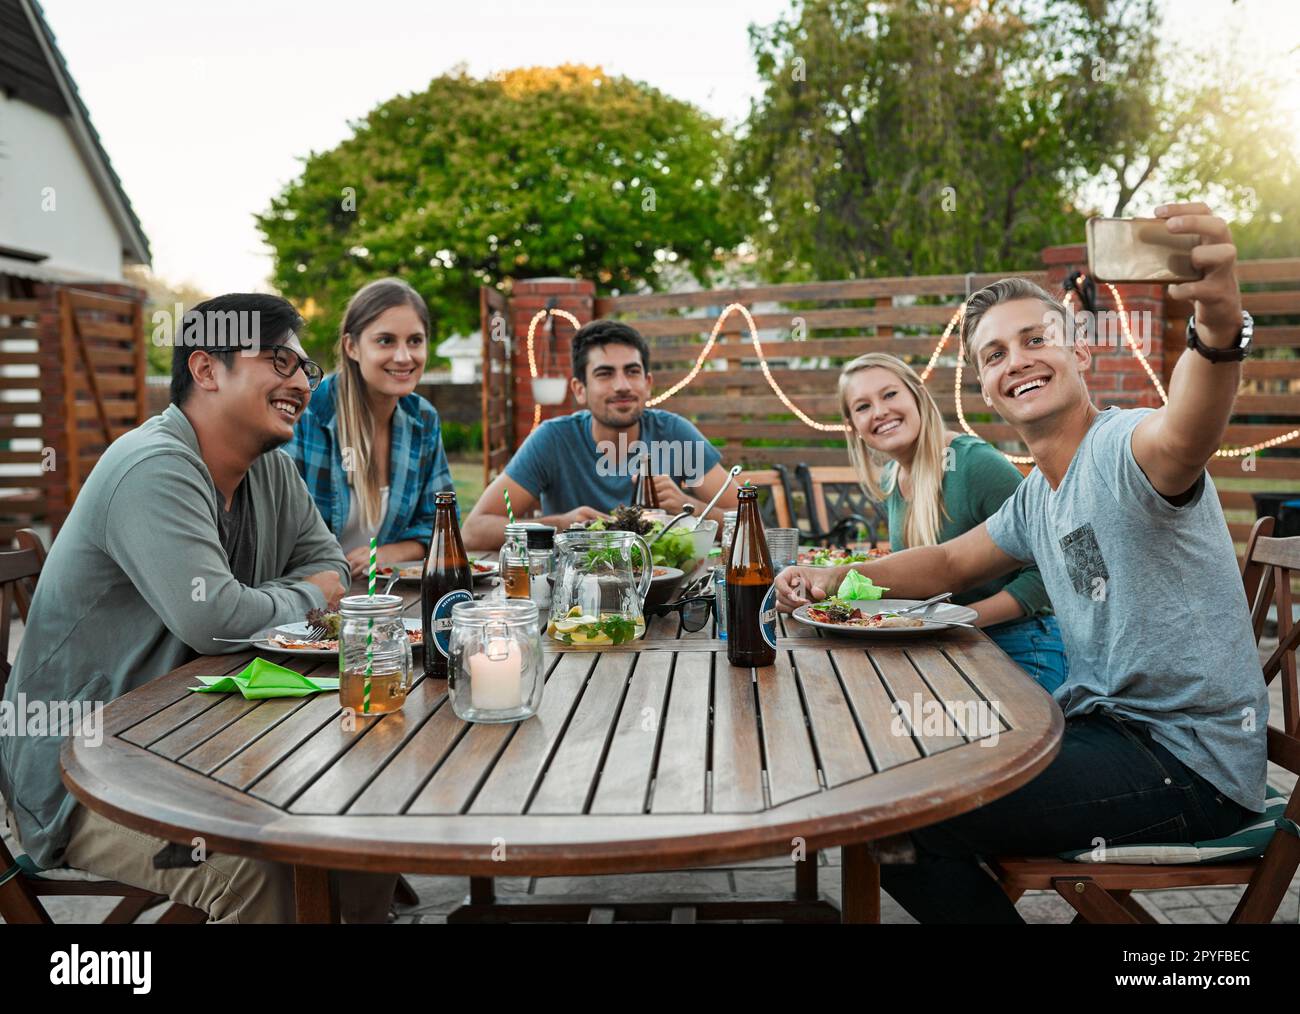 Everyone get closer for the photo. a group of young friends getting closer for a self portrait while being seated outside around a table. Stock Photo